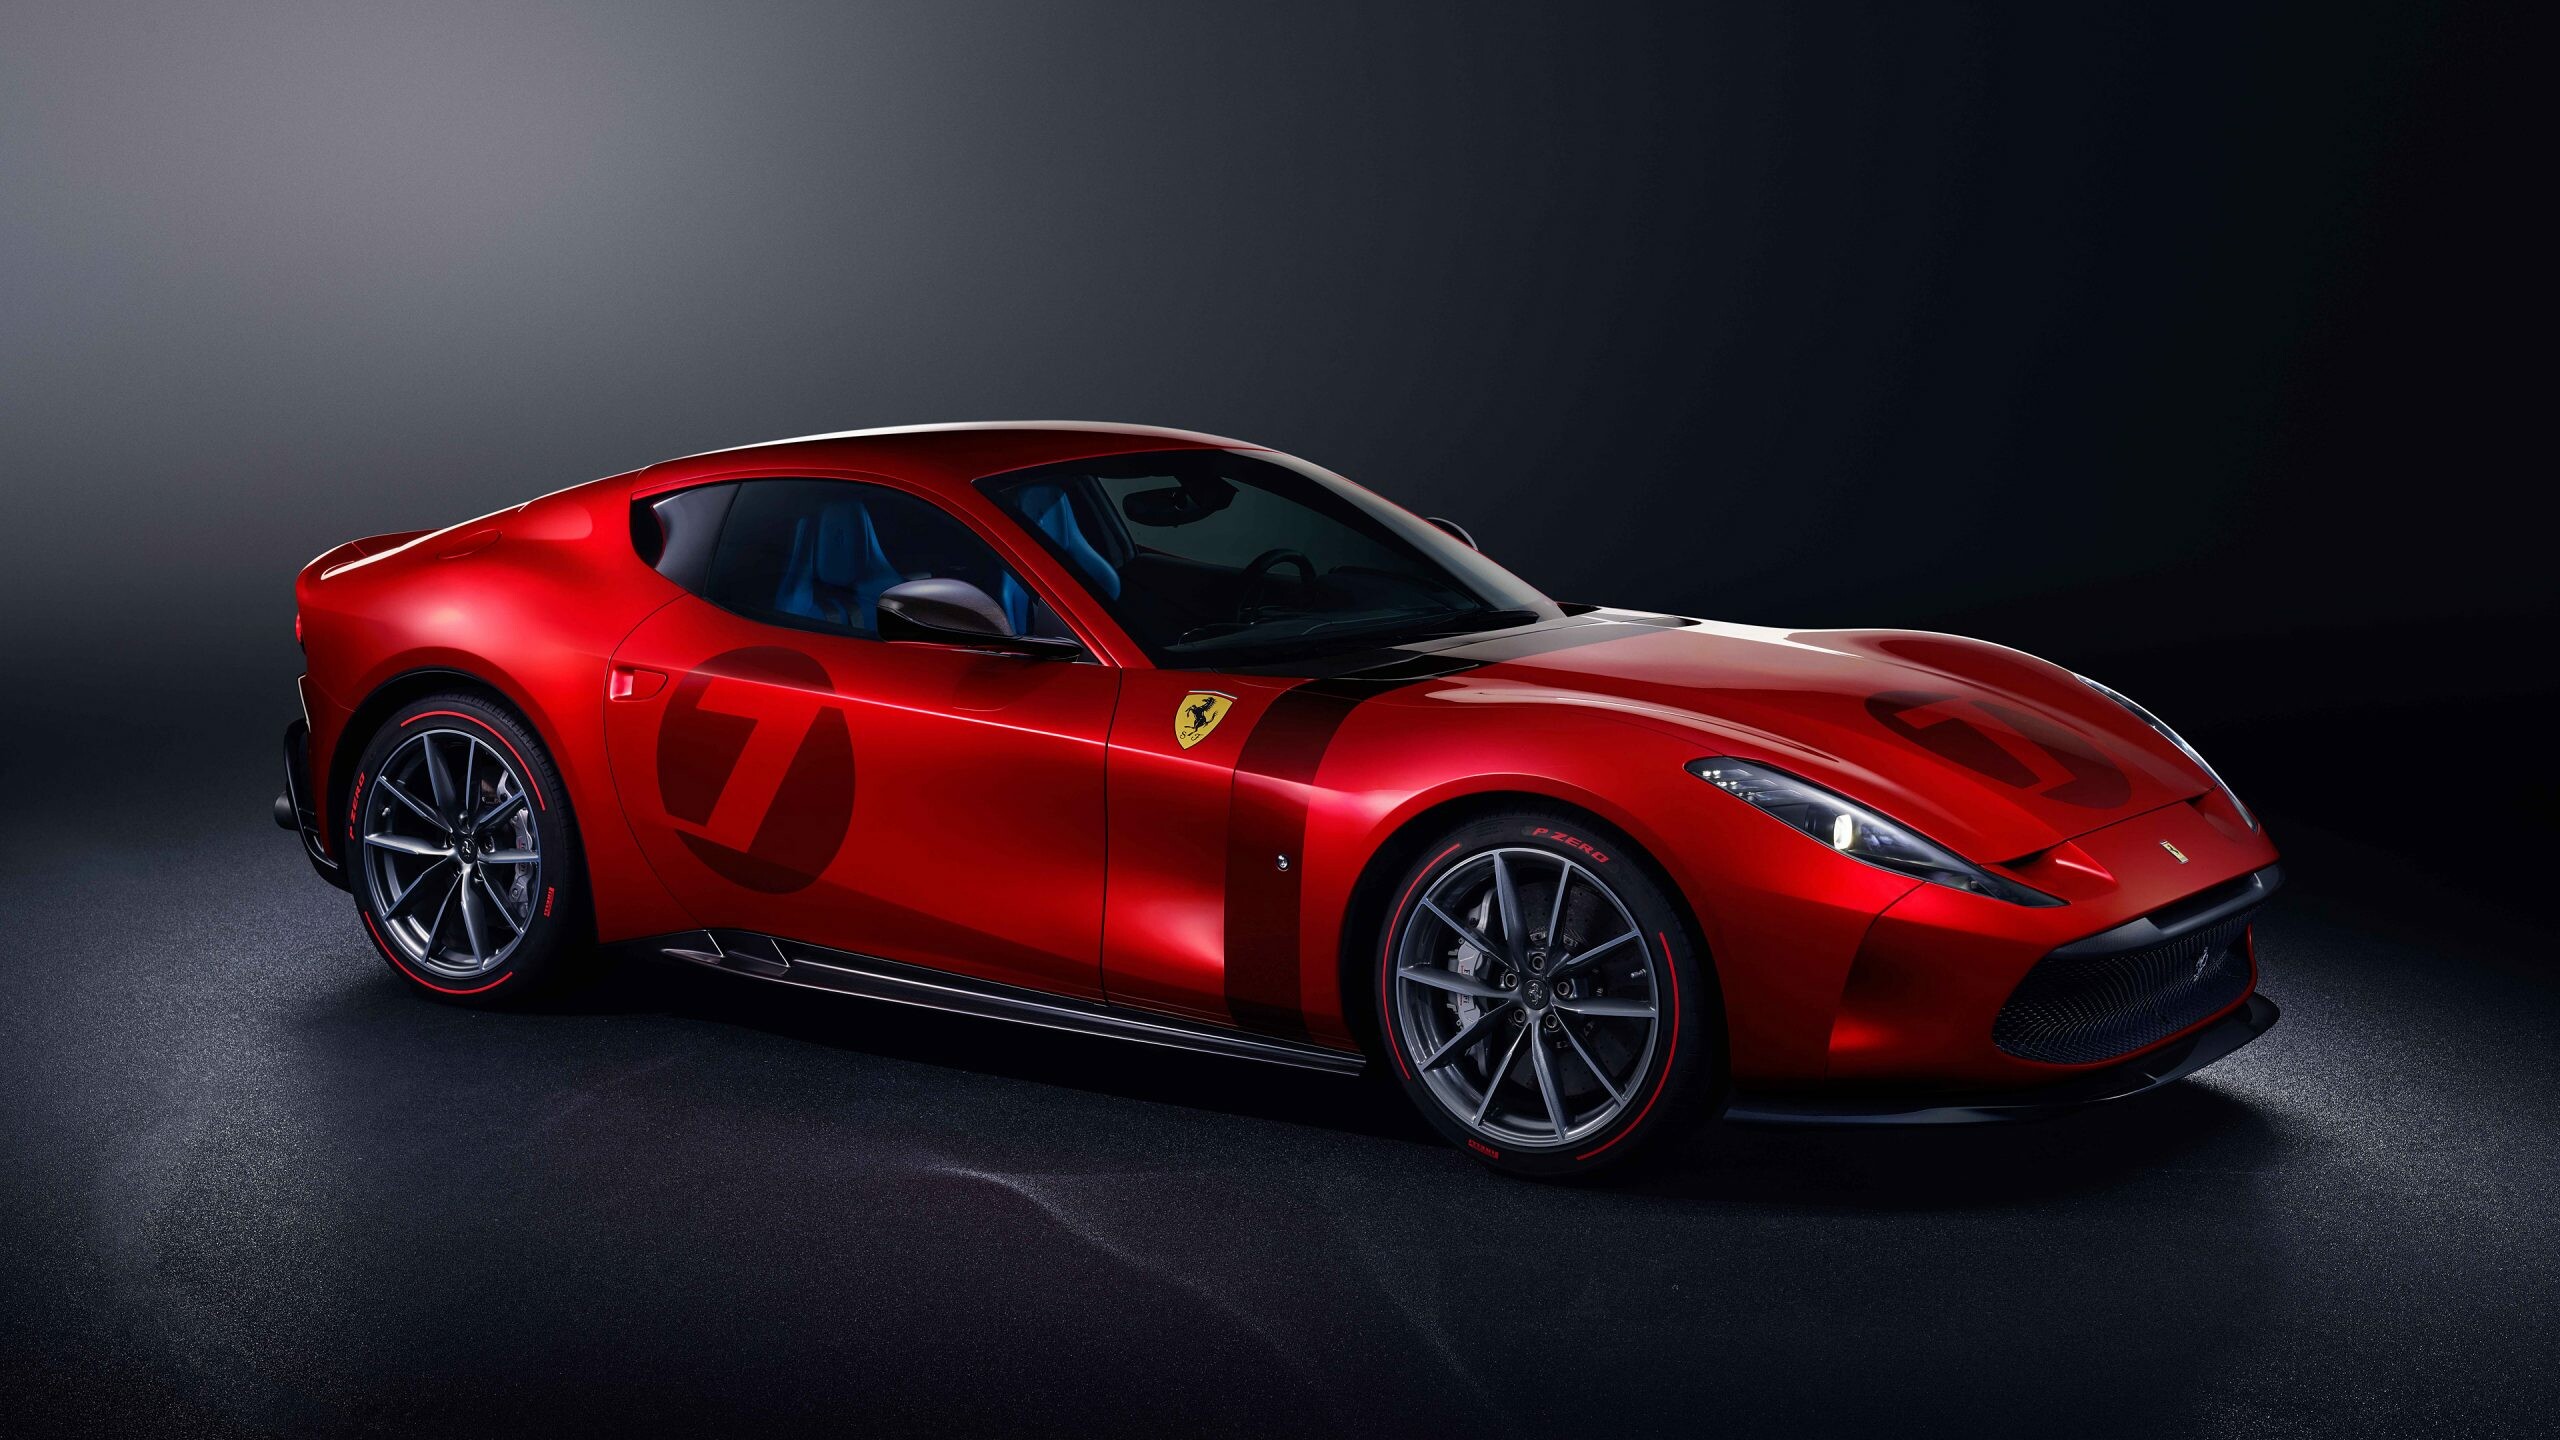 Ferrari: Omologata, The 10th front-engined, V12-powered one-of-a-kind car, 2020. 2560x1440 HD Wallpaper.